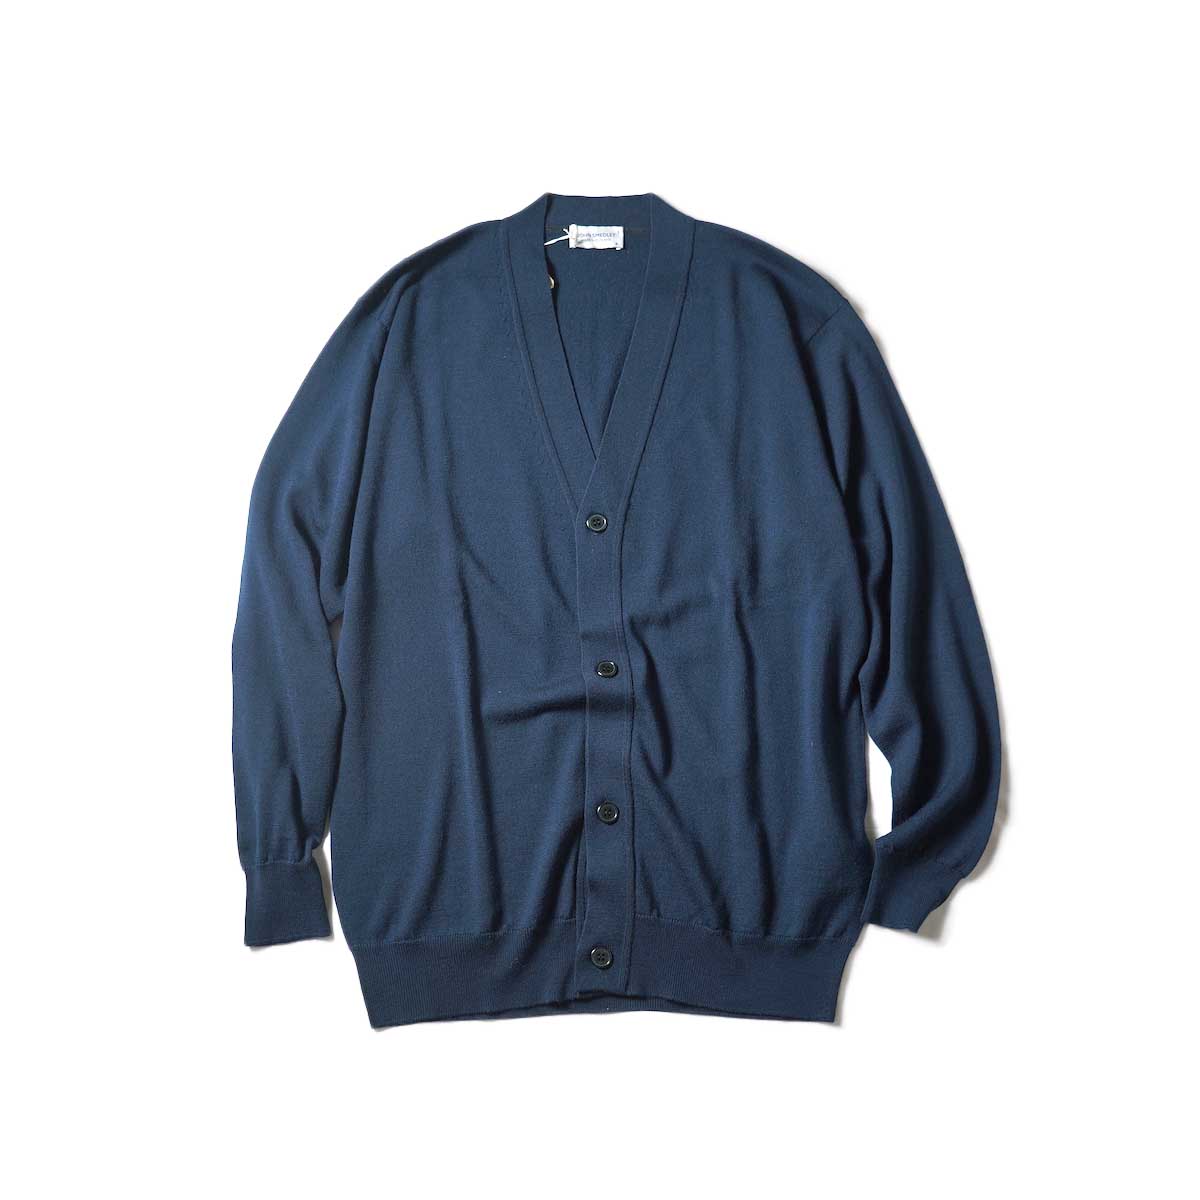 JOHN SMEDLEY / A4590 CARDIGAN VN LS (Orion Green)正面